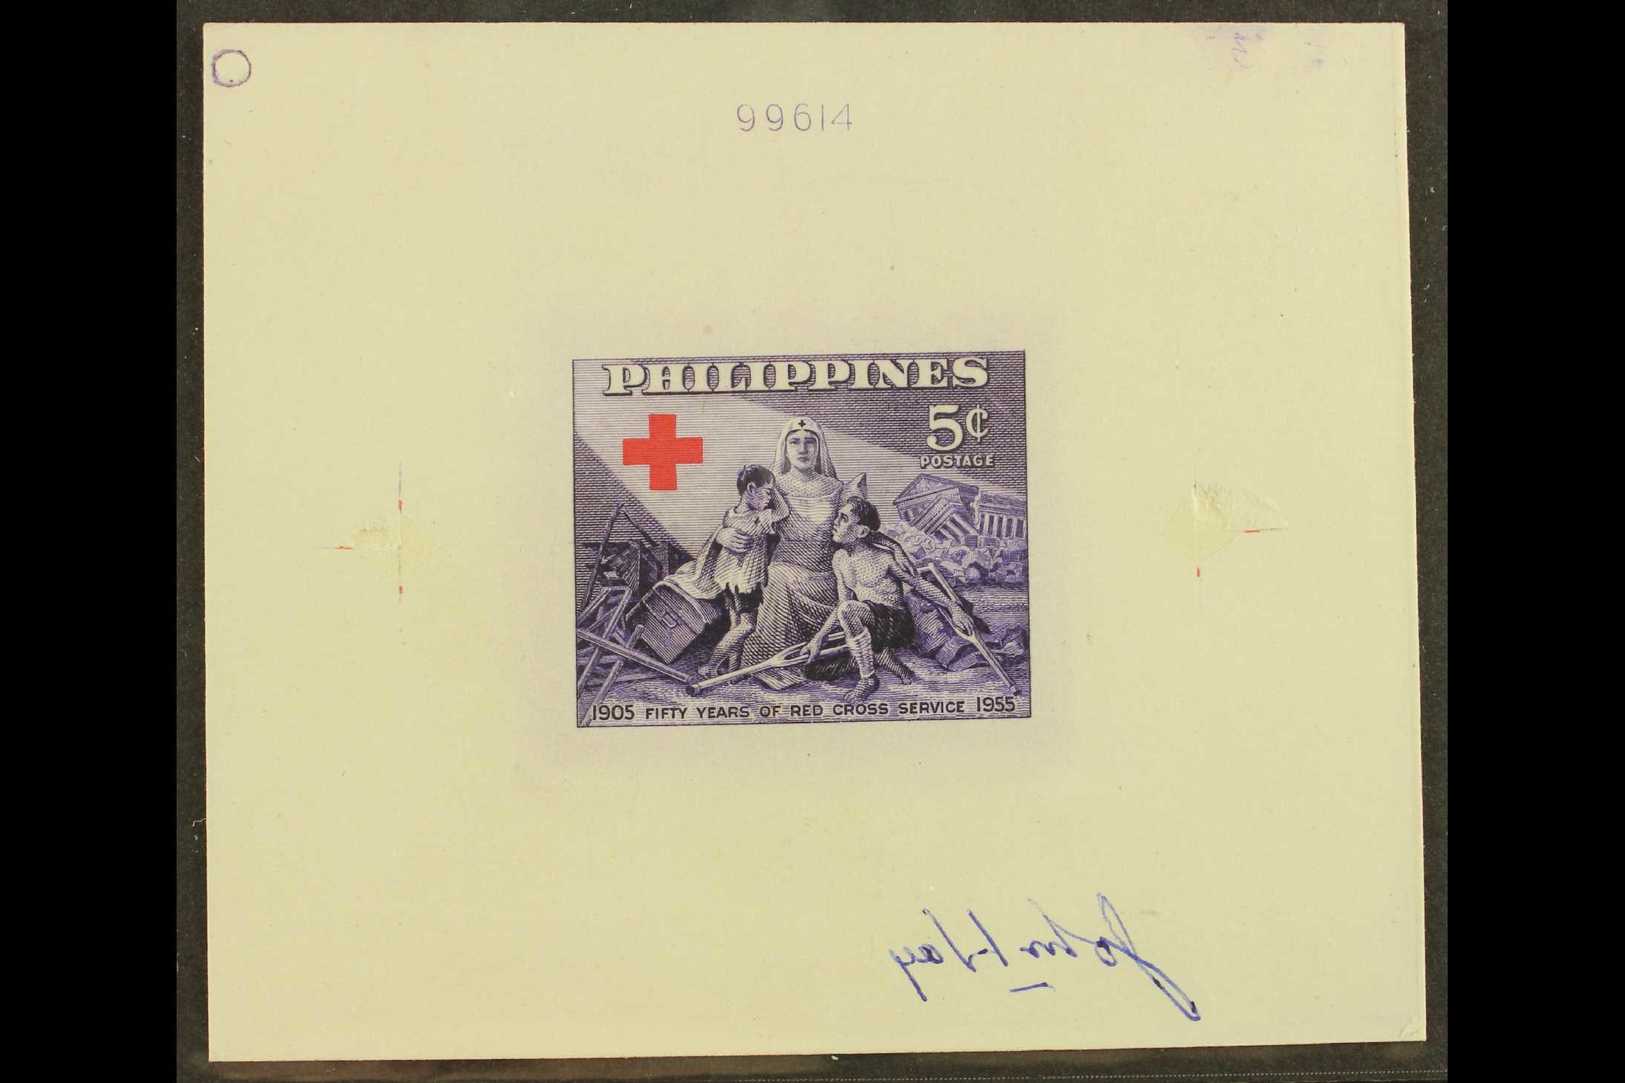 RED CROSS  Philippines 1956 MASTER DIE PROOF 5c Violet, As Scott 627, Mounted On Card, Slightly Cut Down, Clean & Fine.  - Ohne Zuordnung